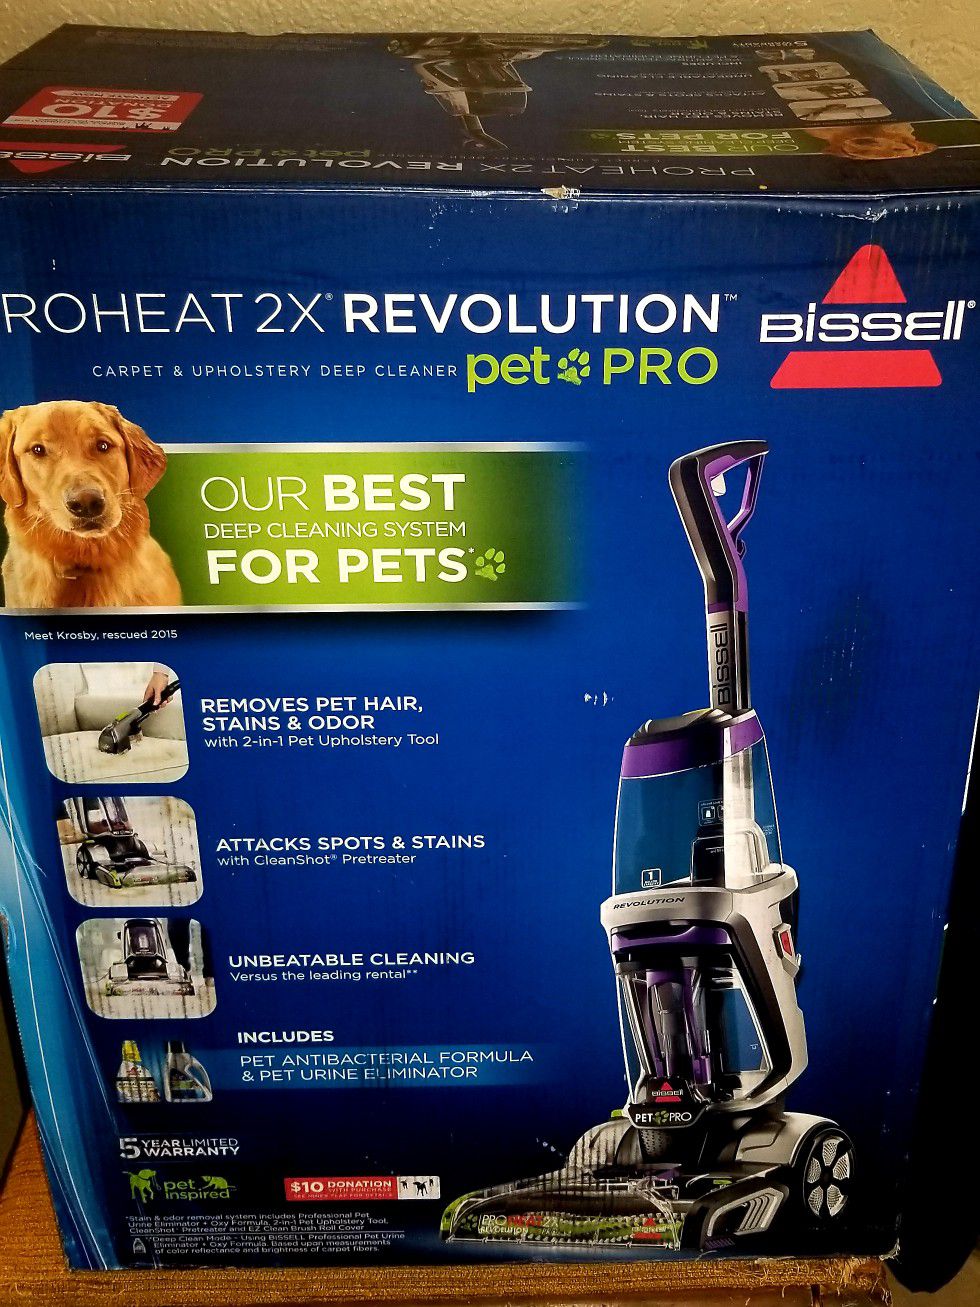 New in box Bissell Proheat 2x Revolution Pet Pro Carpet Upholstery Cleaner